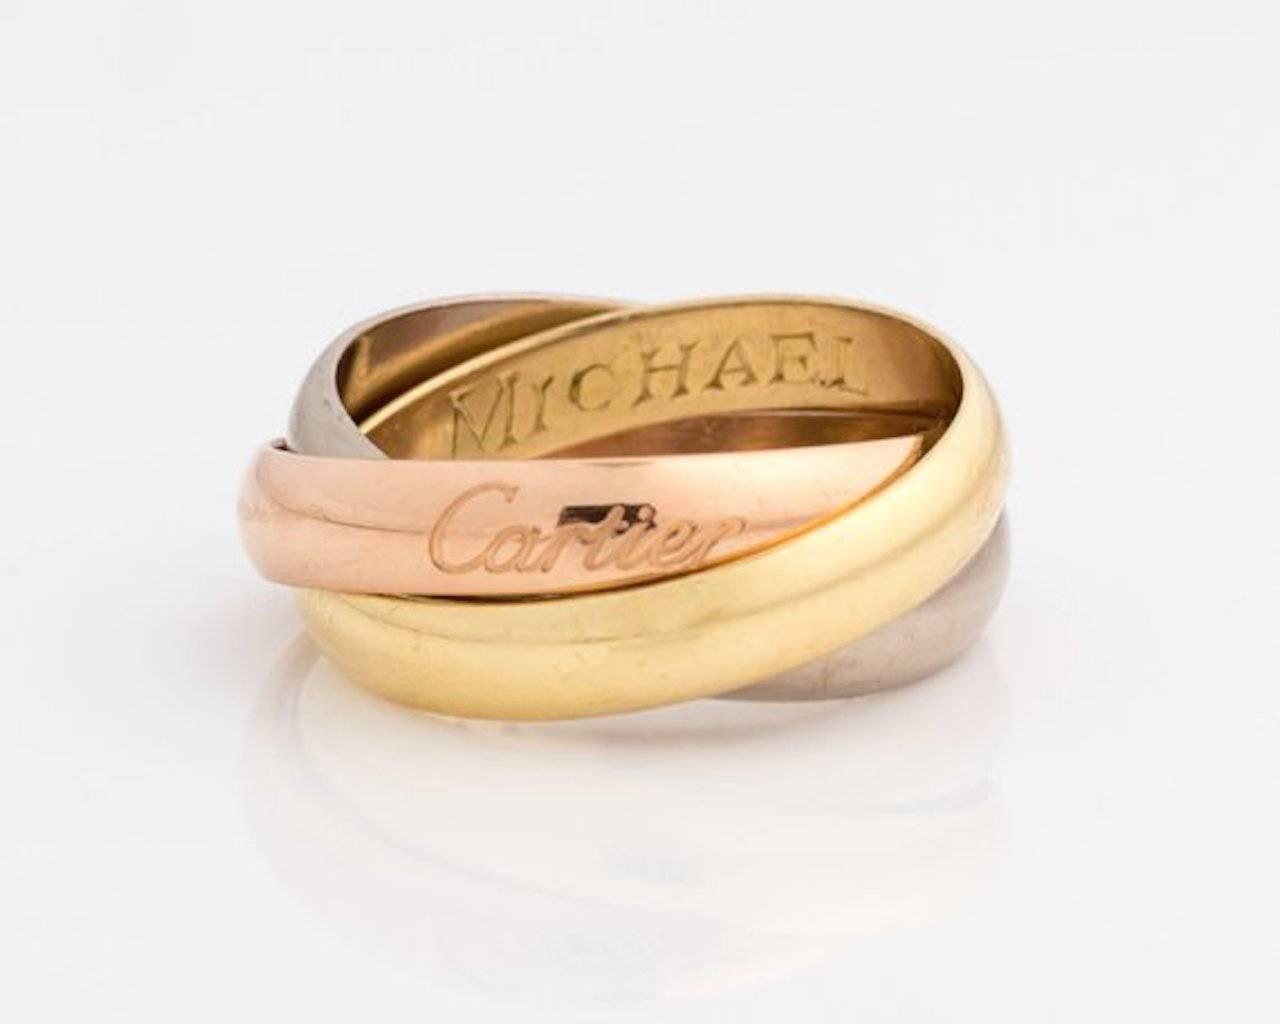 1974 Cartier Tricolor Trinity Ring - 18k Gold, Rose Gold, White Gold, Yellow Gold

Features 3 interlocking 18 karat Gold bands. 
The rose gold band has the hallmark 